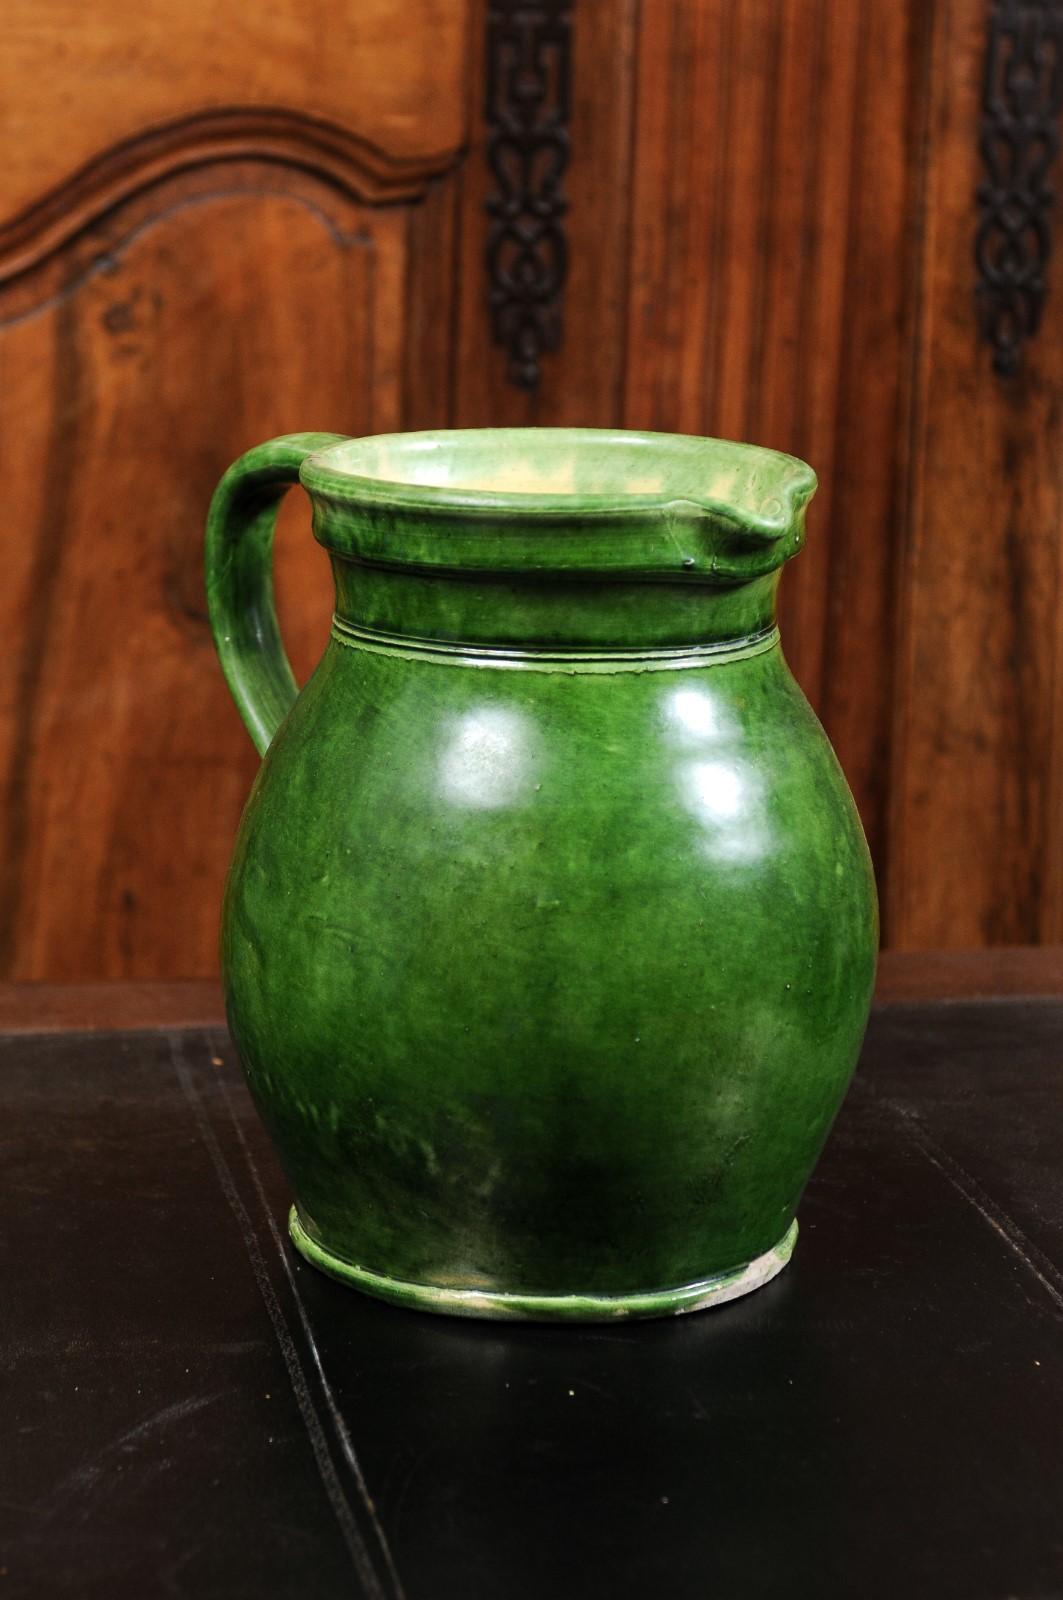 Rustic French Provincial 19th Century Pitcher with Green Glazed Body 6